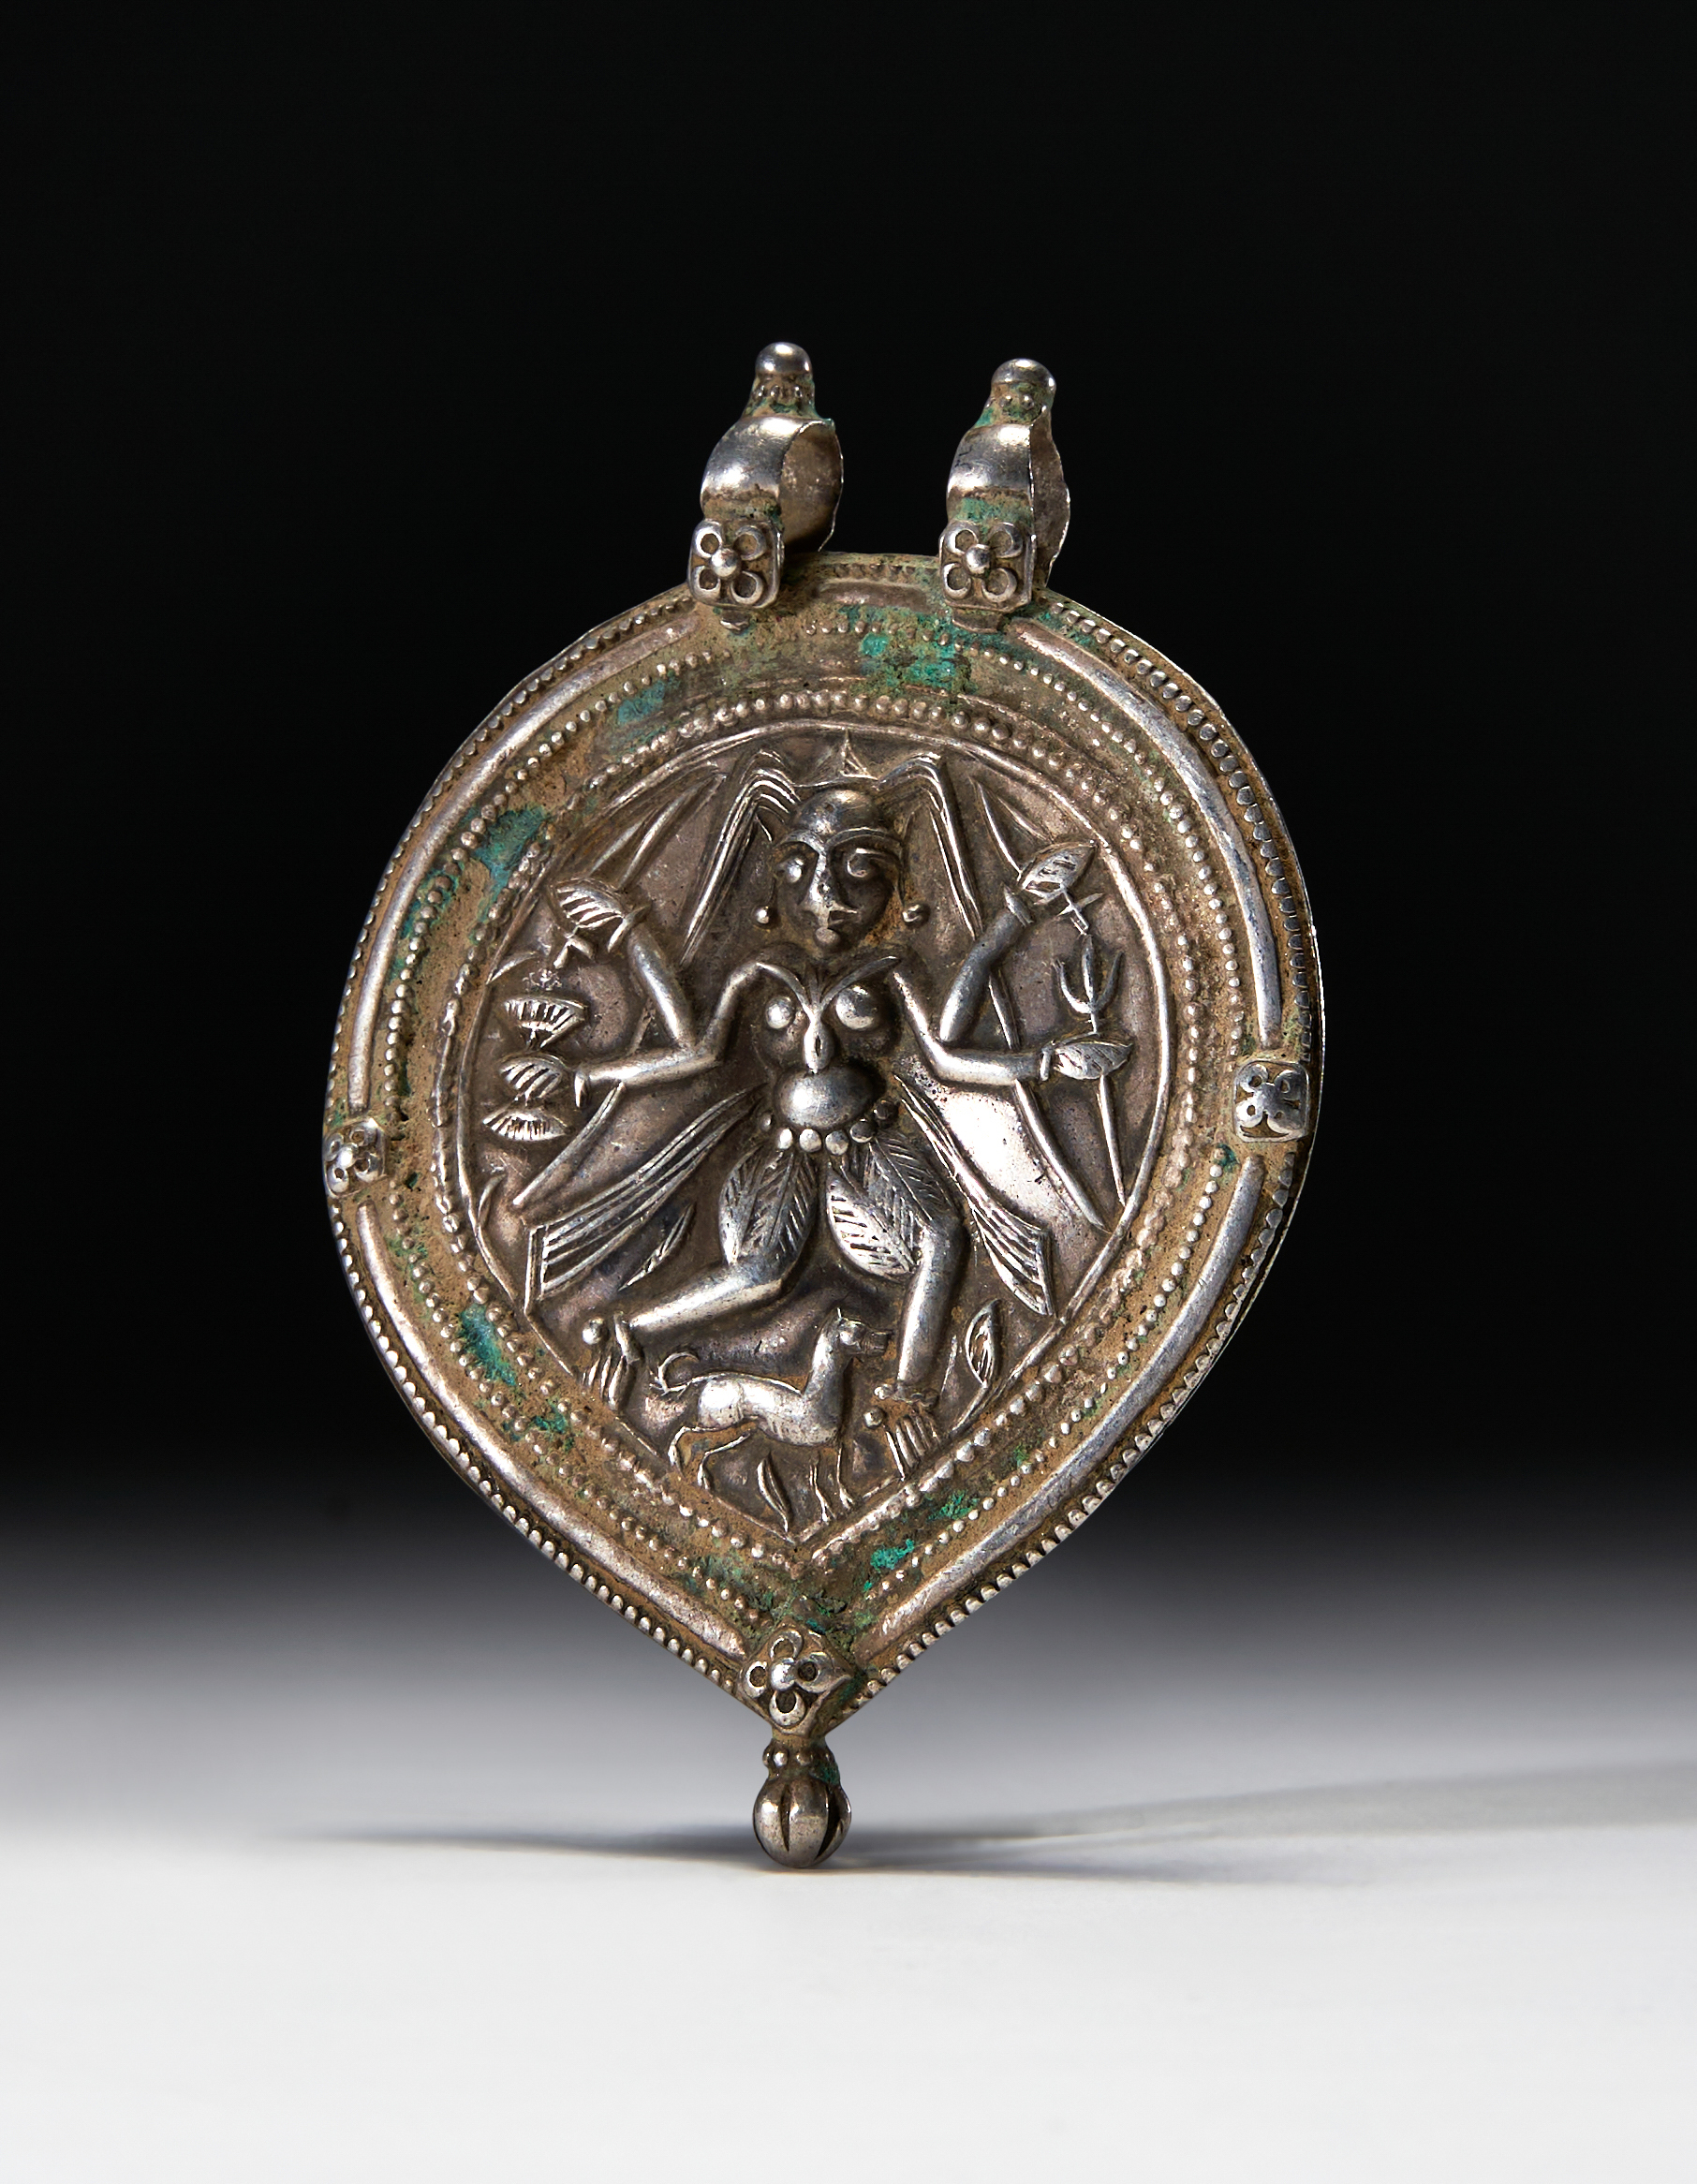 A SILVER AMULET OF SHIVA, NORTHERN INDIA, 19TH/20TH CENTURY